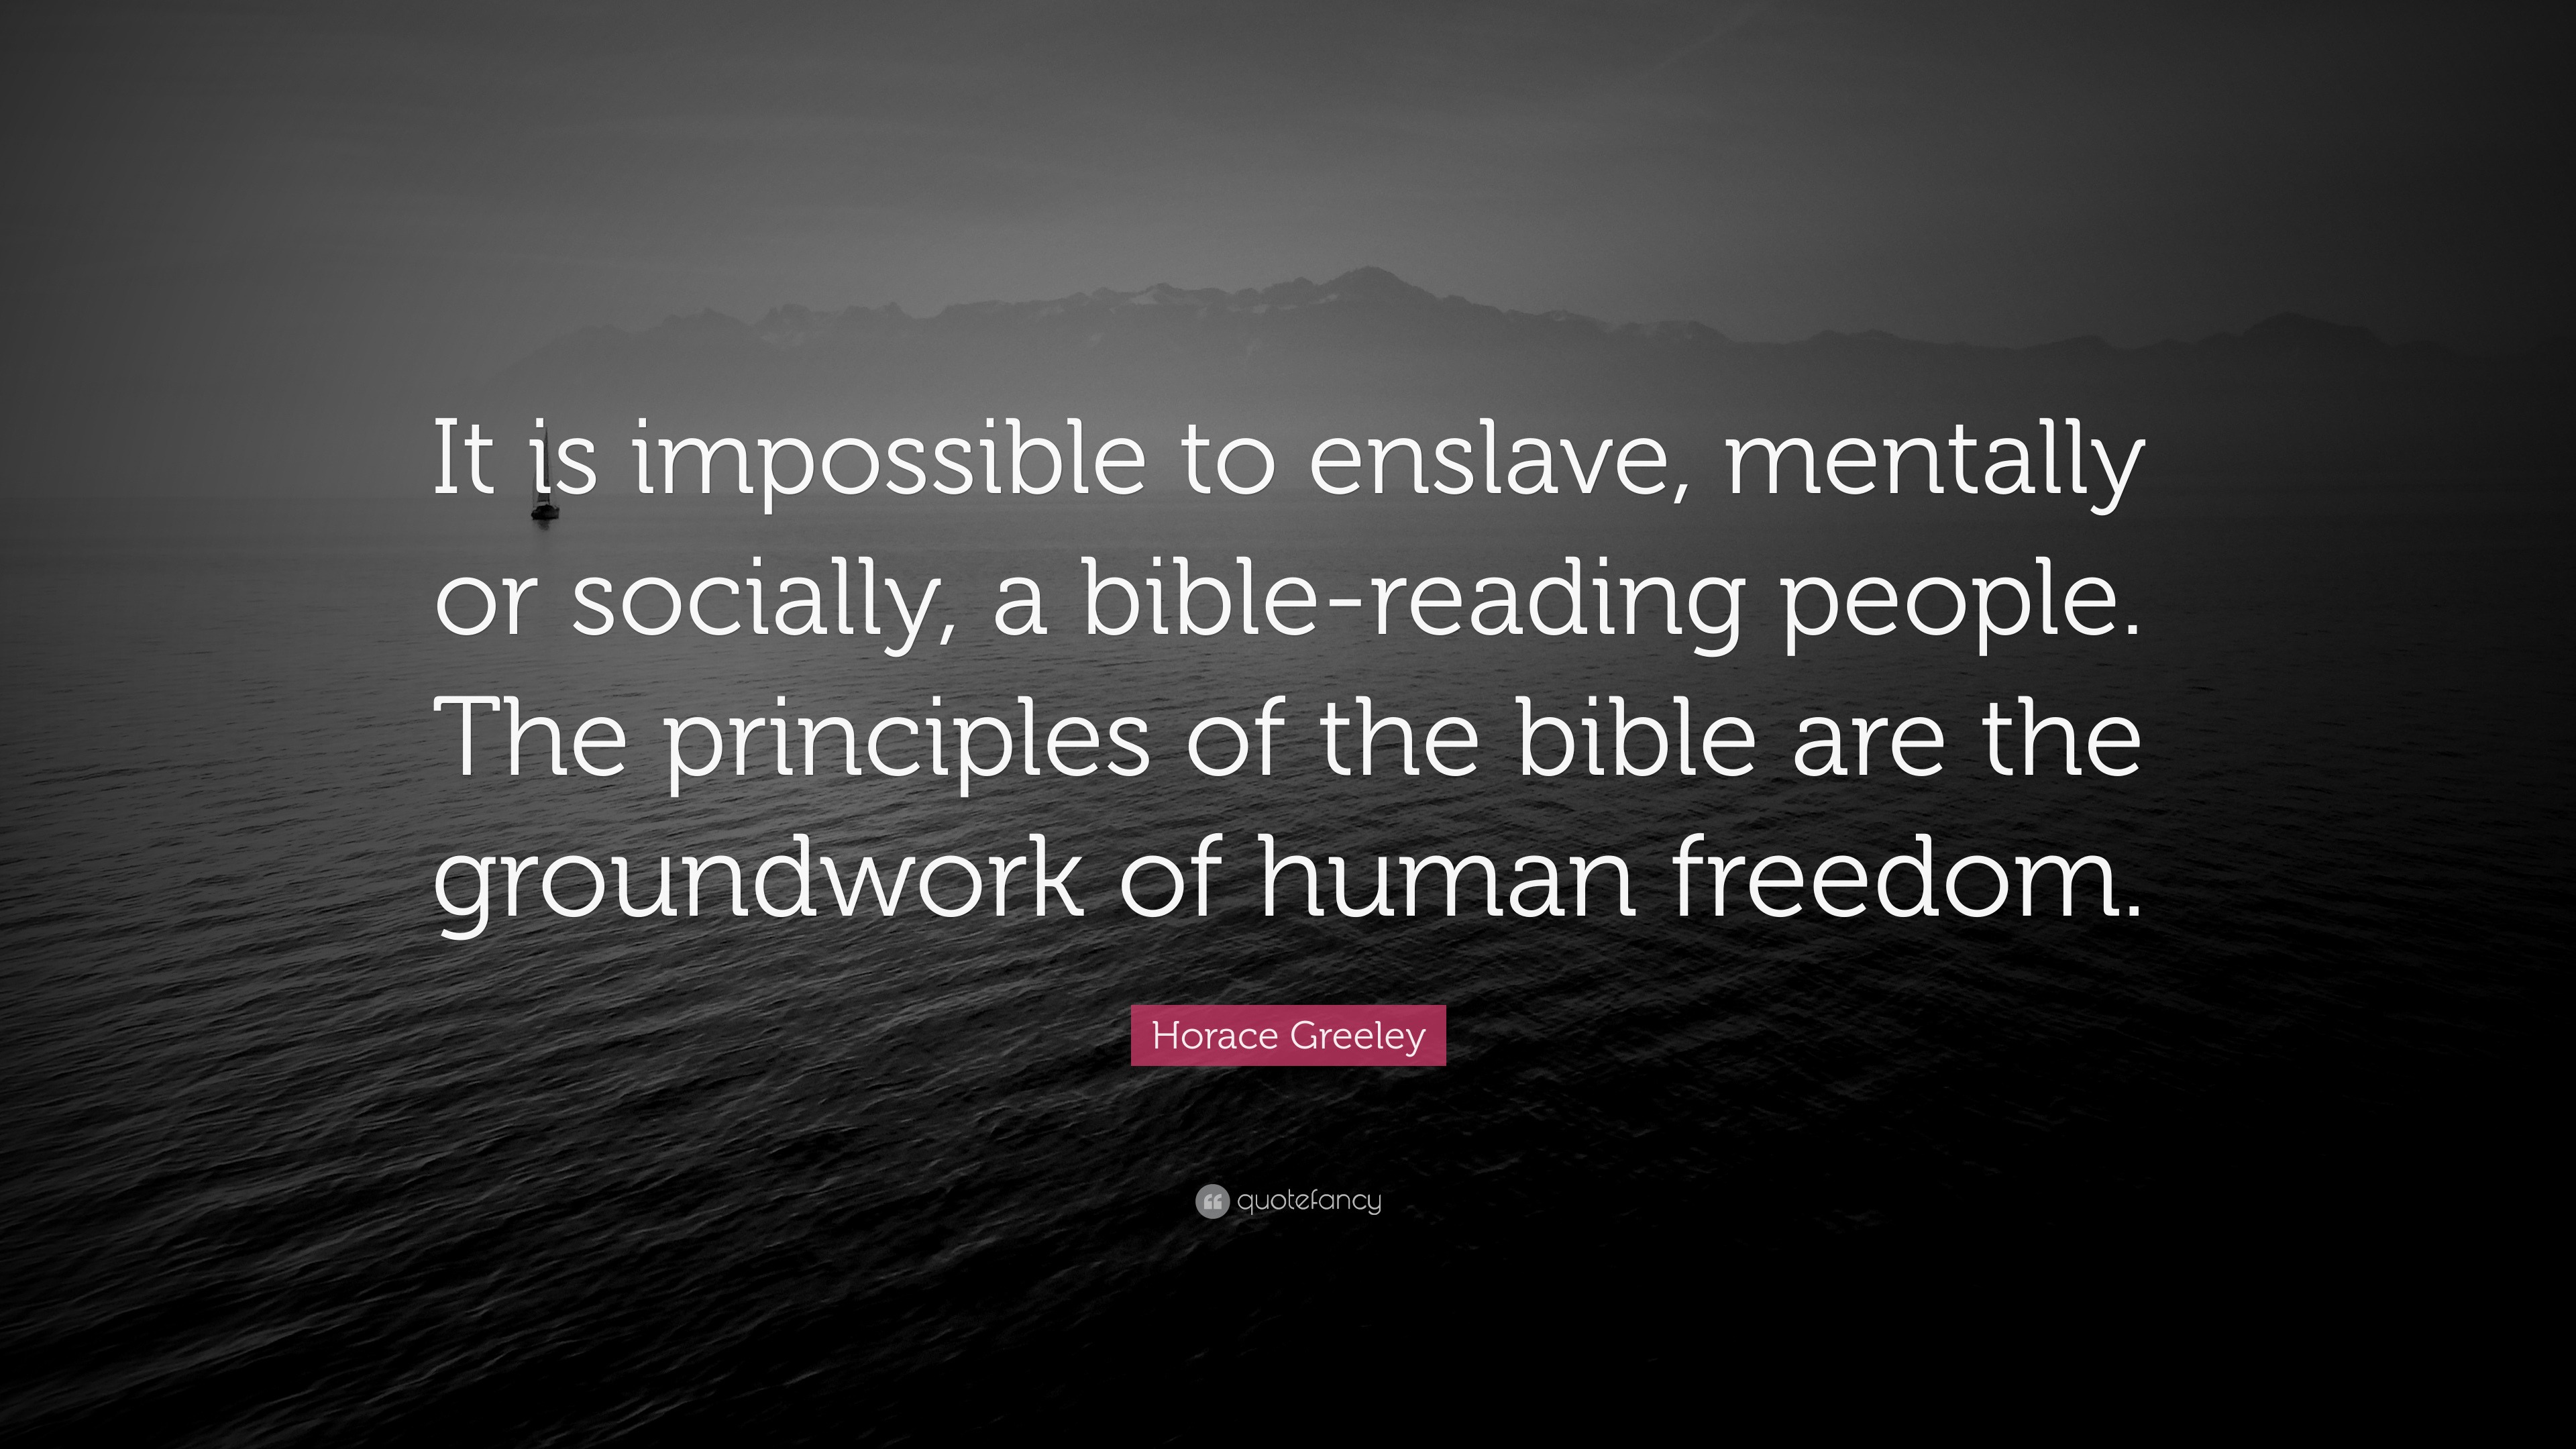 Horace Greeley Quote: “It is impossible to enslave, mentally or